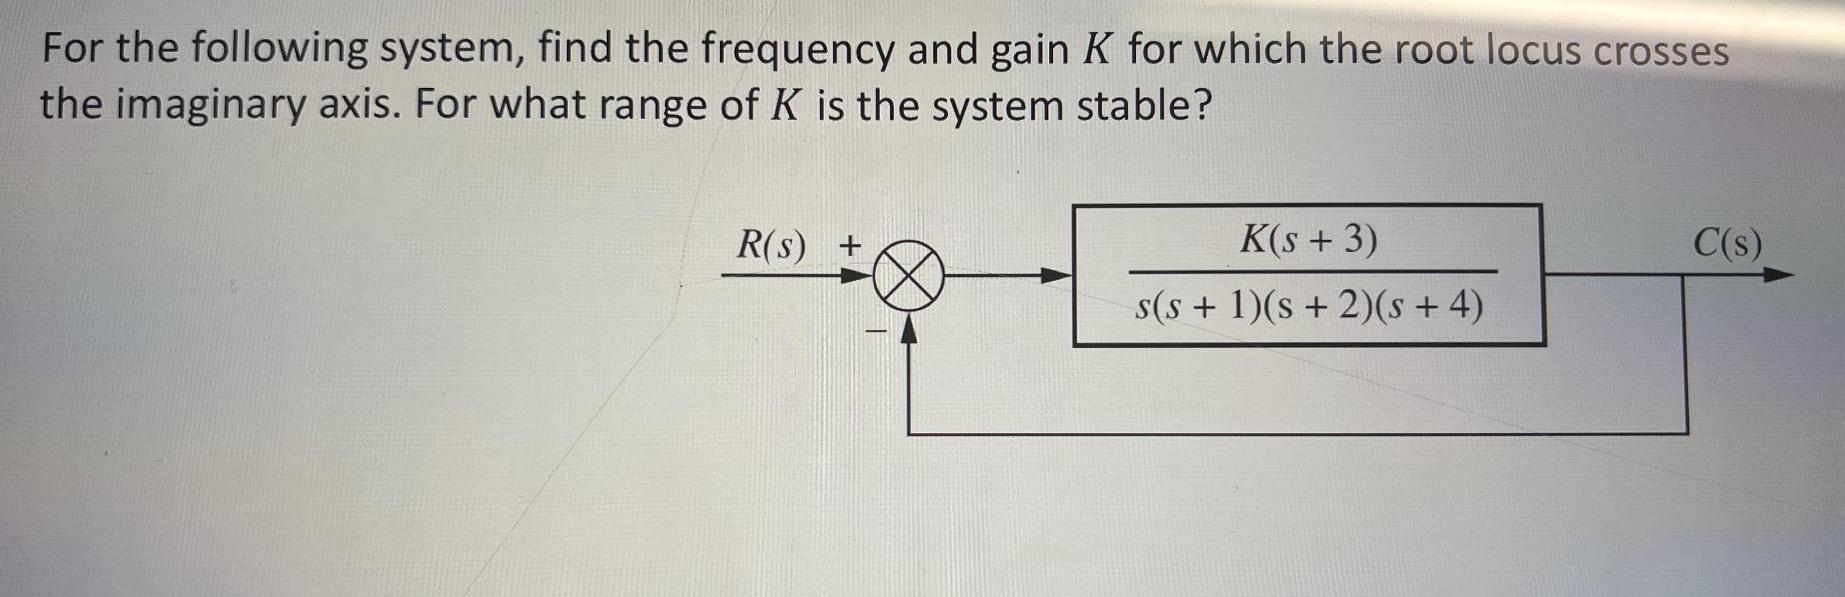 For the following system, find the frequency and gain K for which the root locus crosses the imaginary axis.